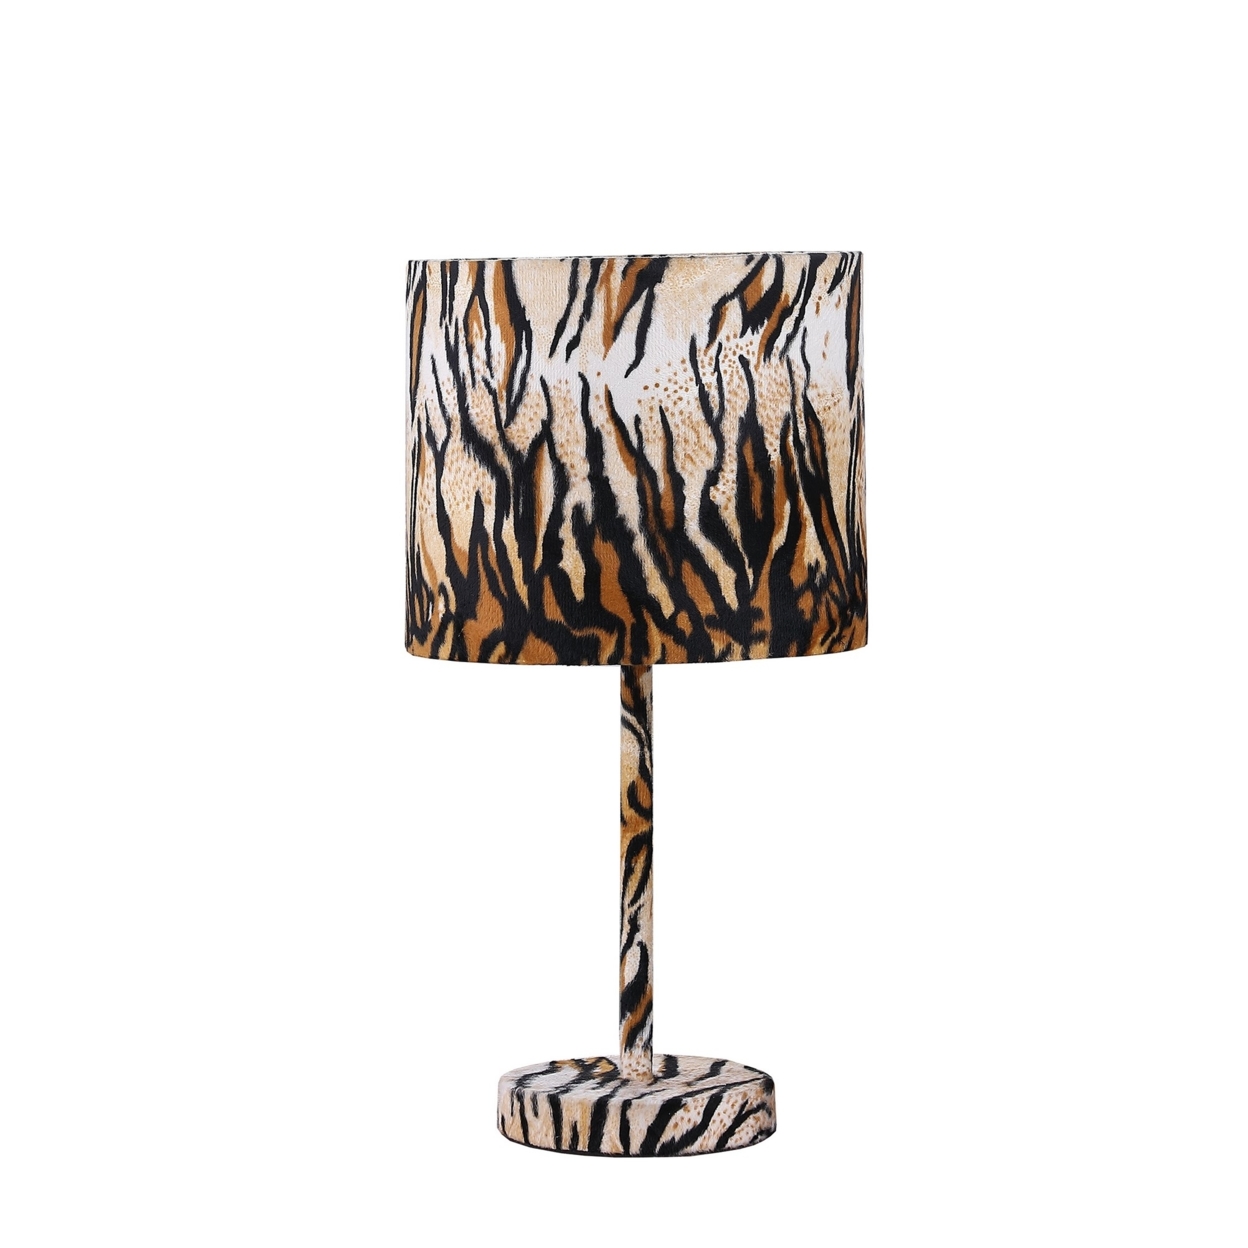 Fabric Wrapped Table Lamp With Striped Animal Print, Brown And Black- Saltoro Sherpi